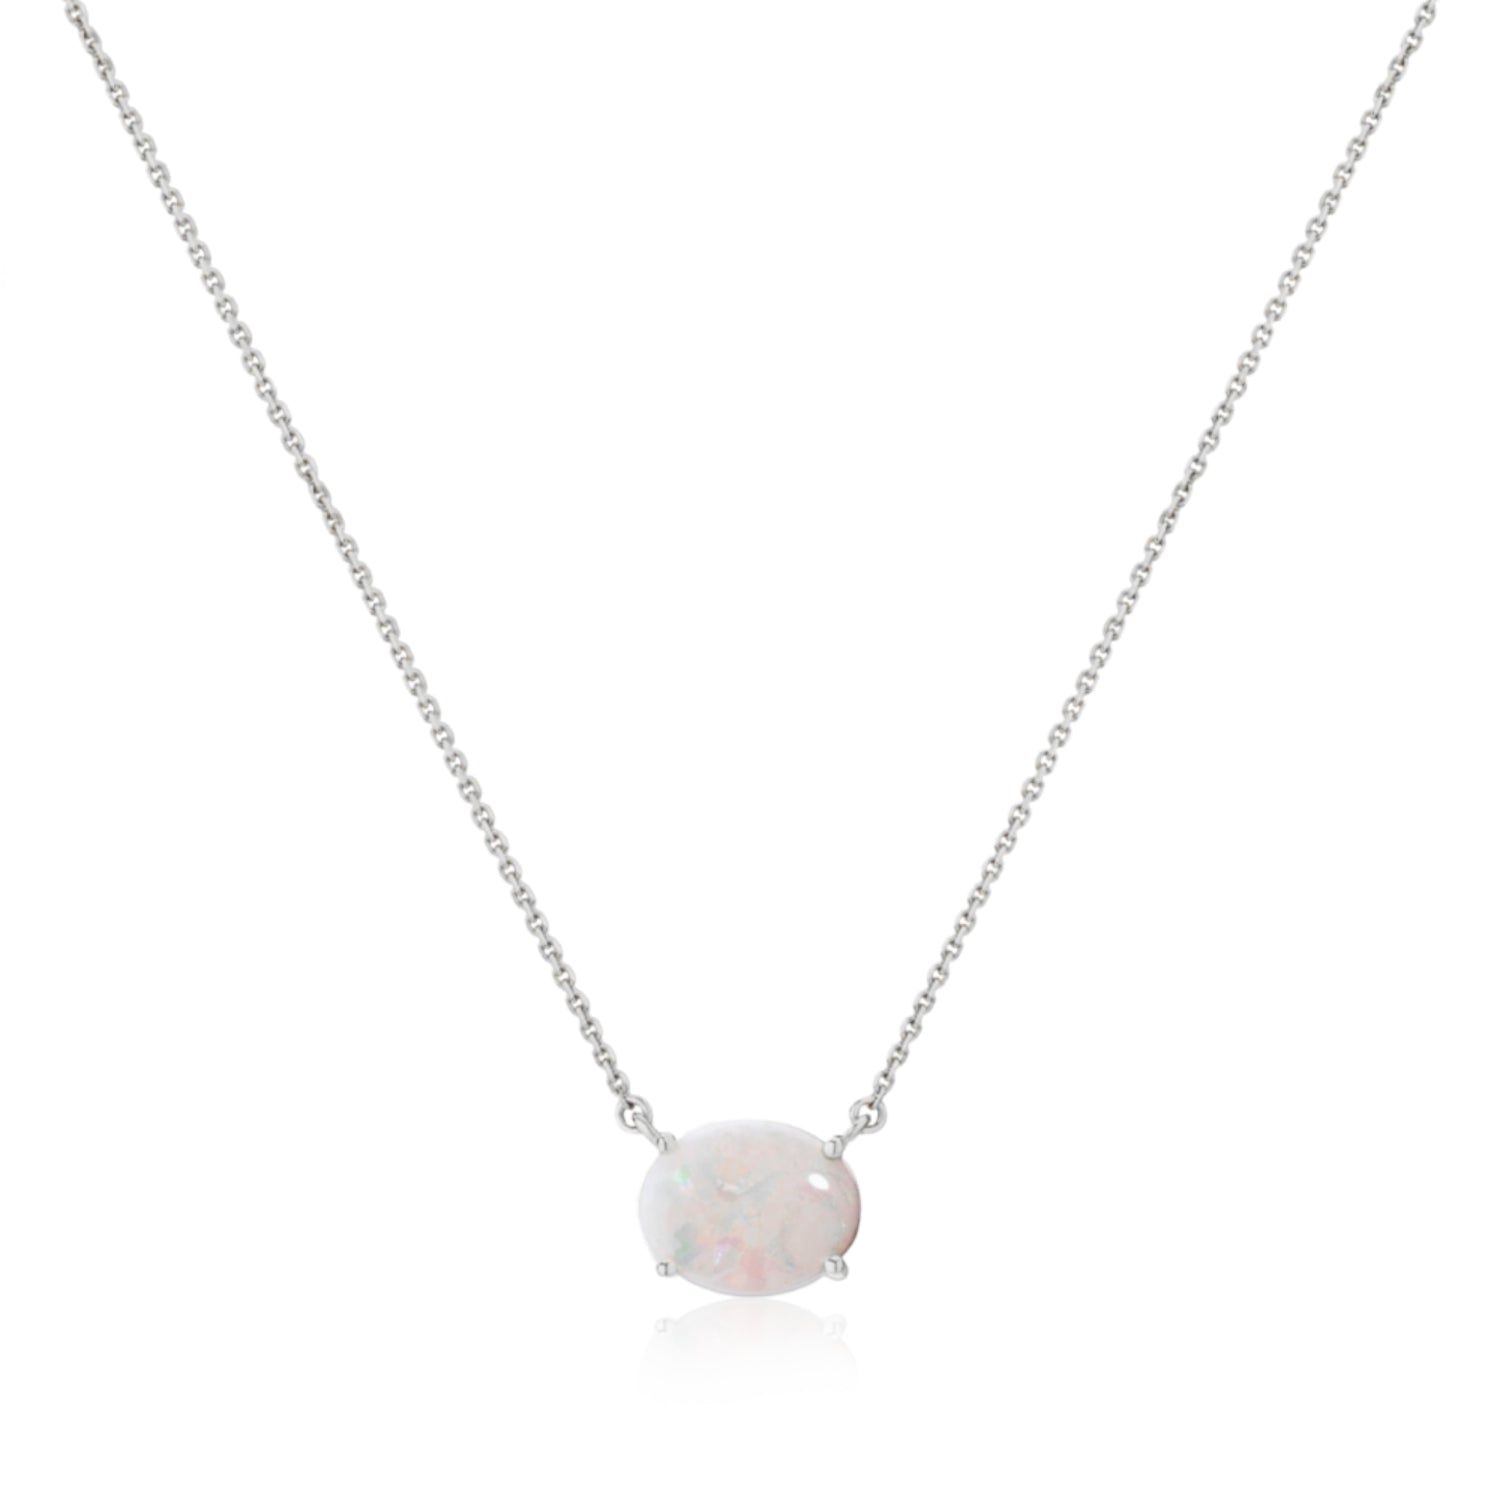 Oval Cut White Opal East-West Solitaire Necklace in White Gold